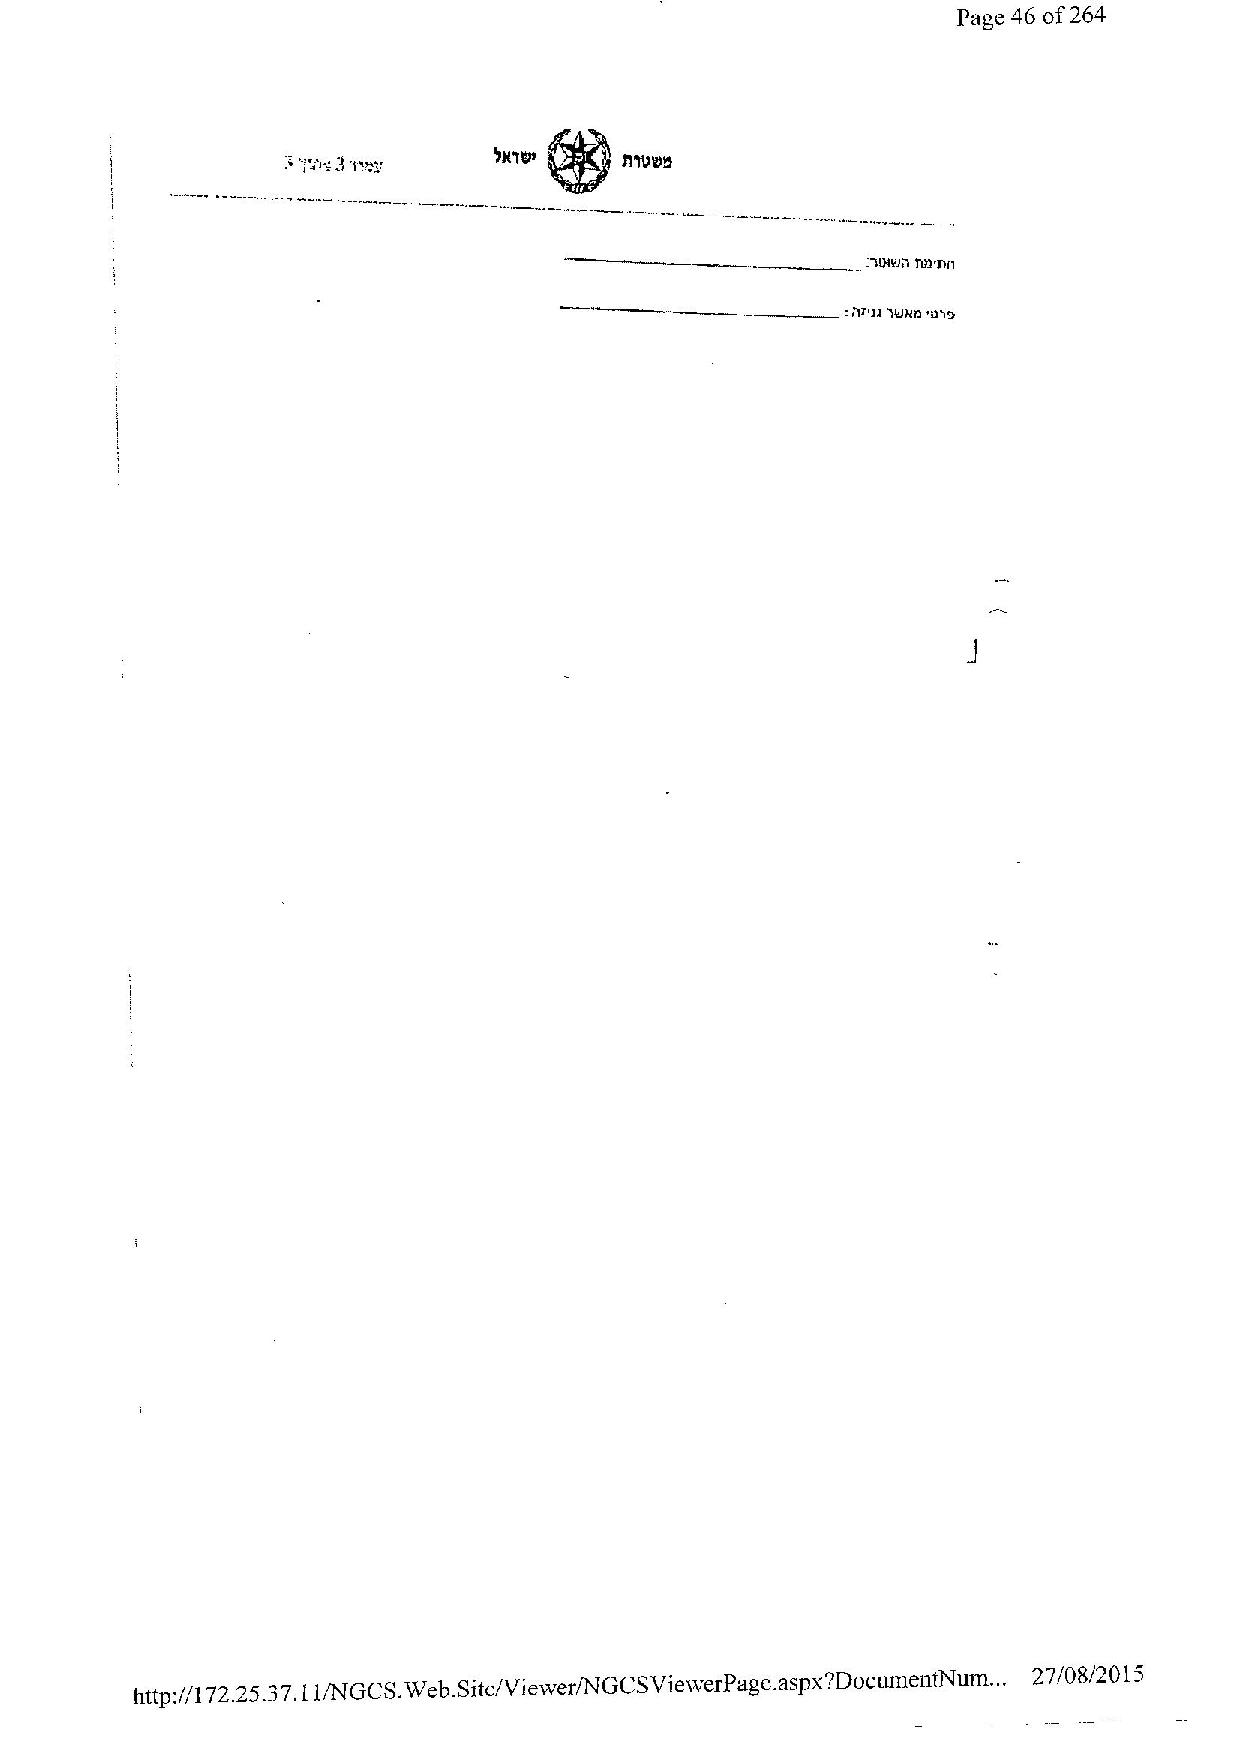 document-page-046